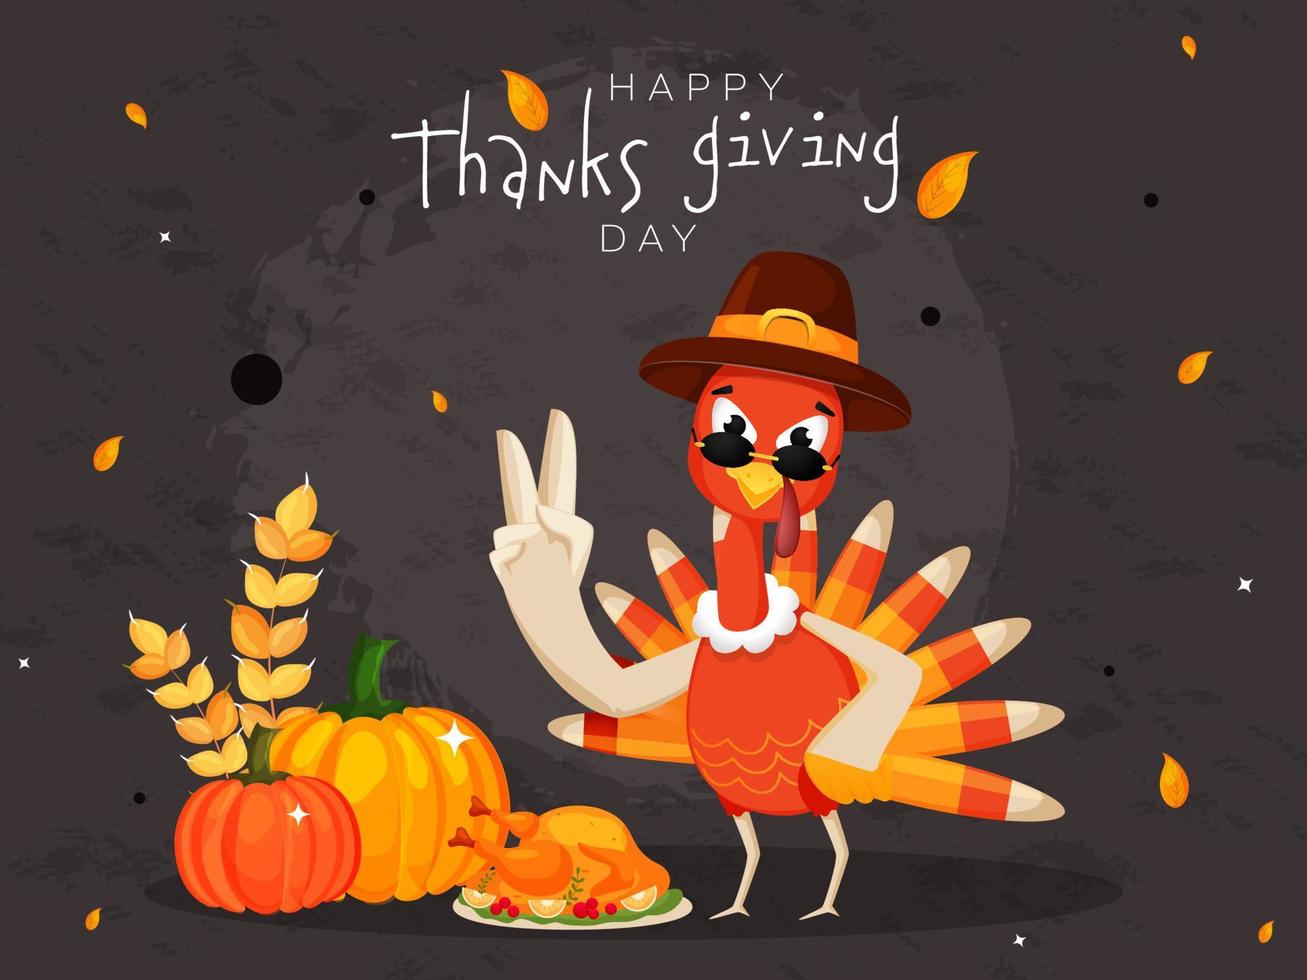 Cartoon Turkey Bird Wearing Pilgrim Hat with Food Elements and Leaves Falling on Grey Grunge Background for Happy Thanksgiving Day. vector